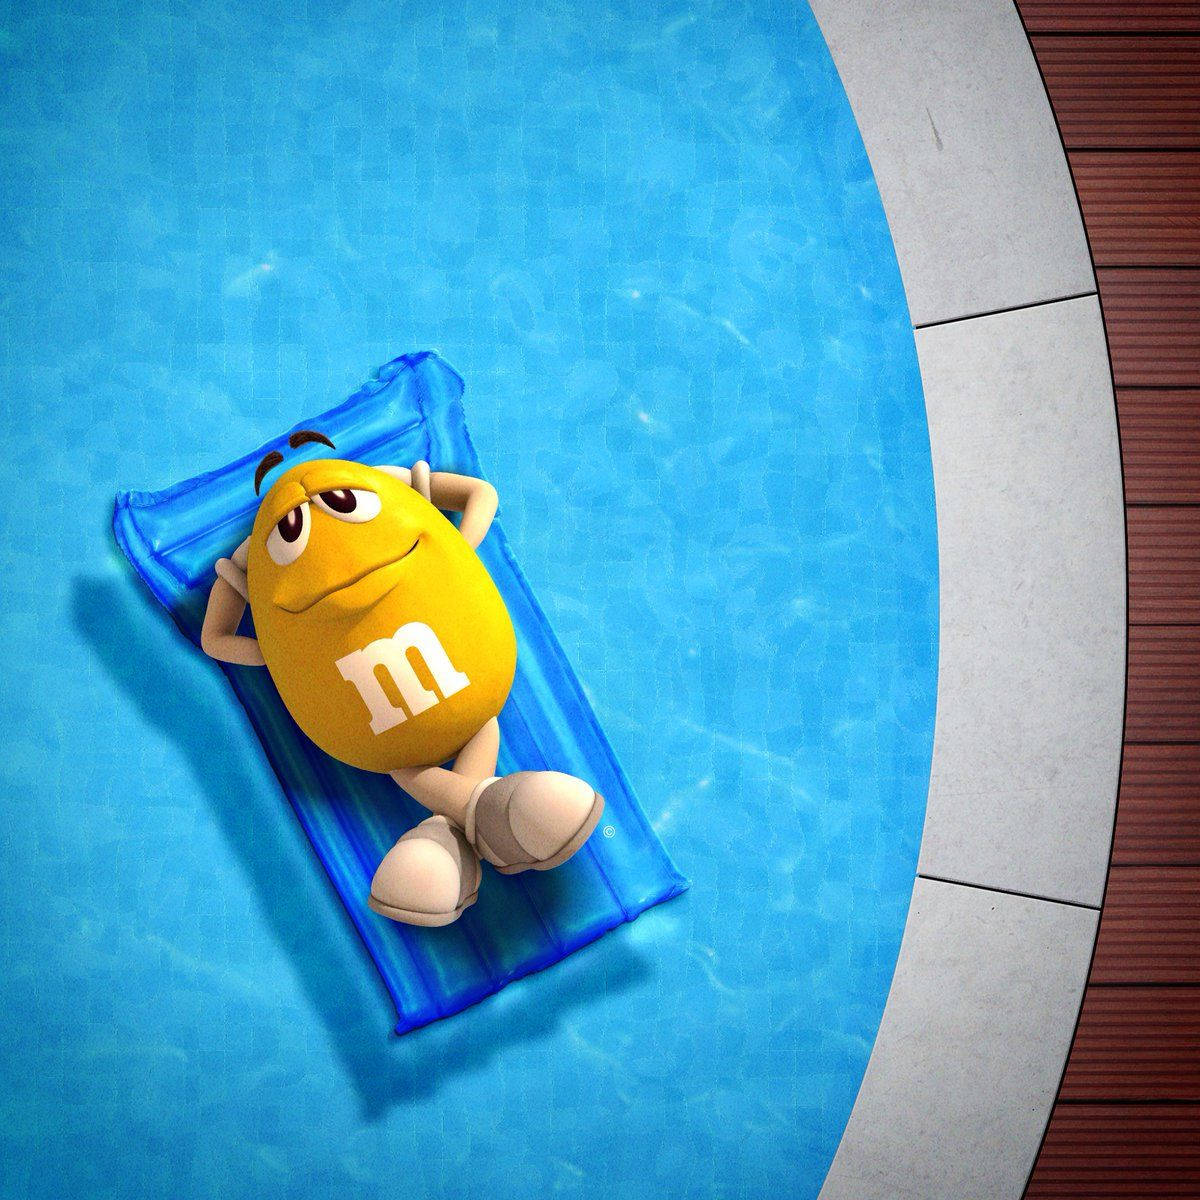 Mms Yellow Relaxing On A Pool Background